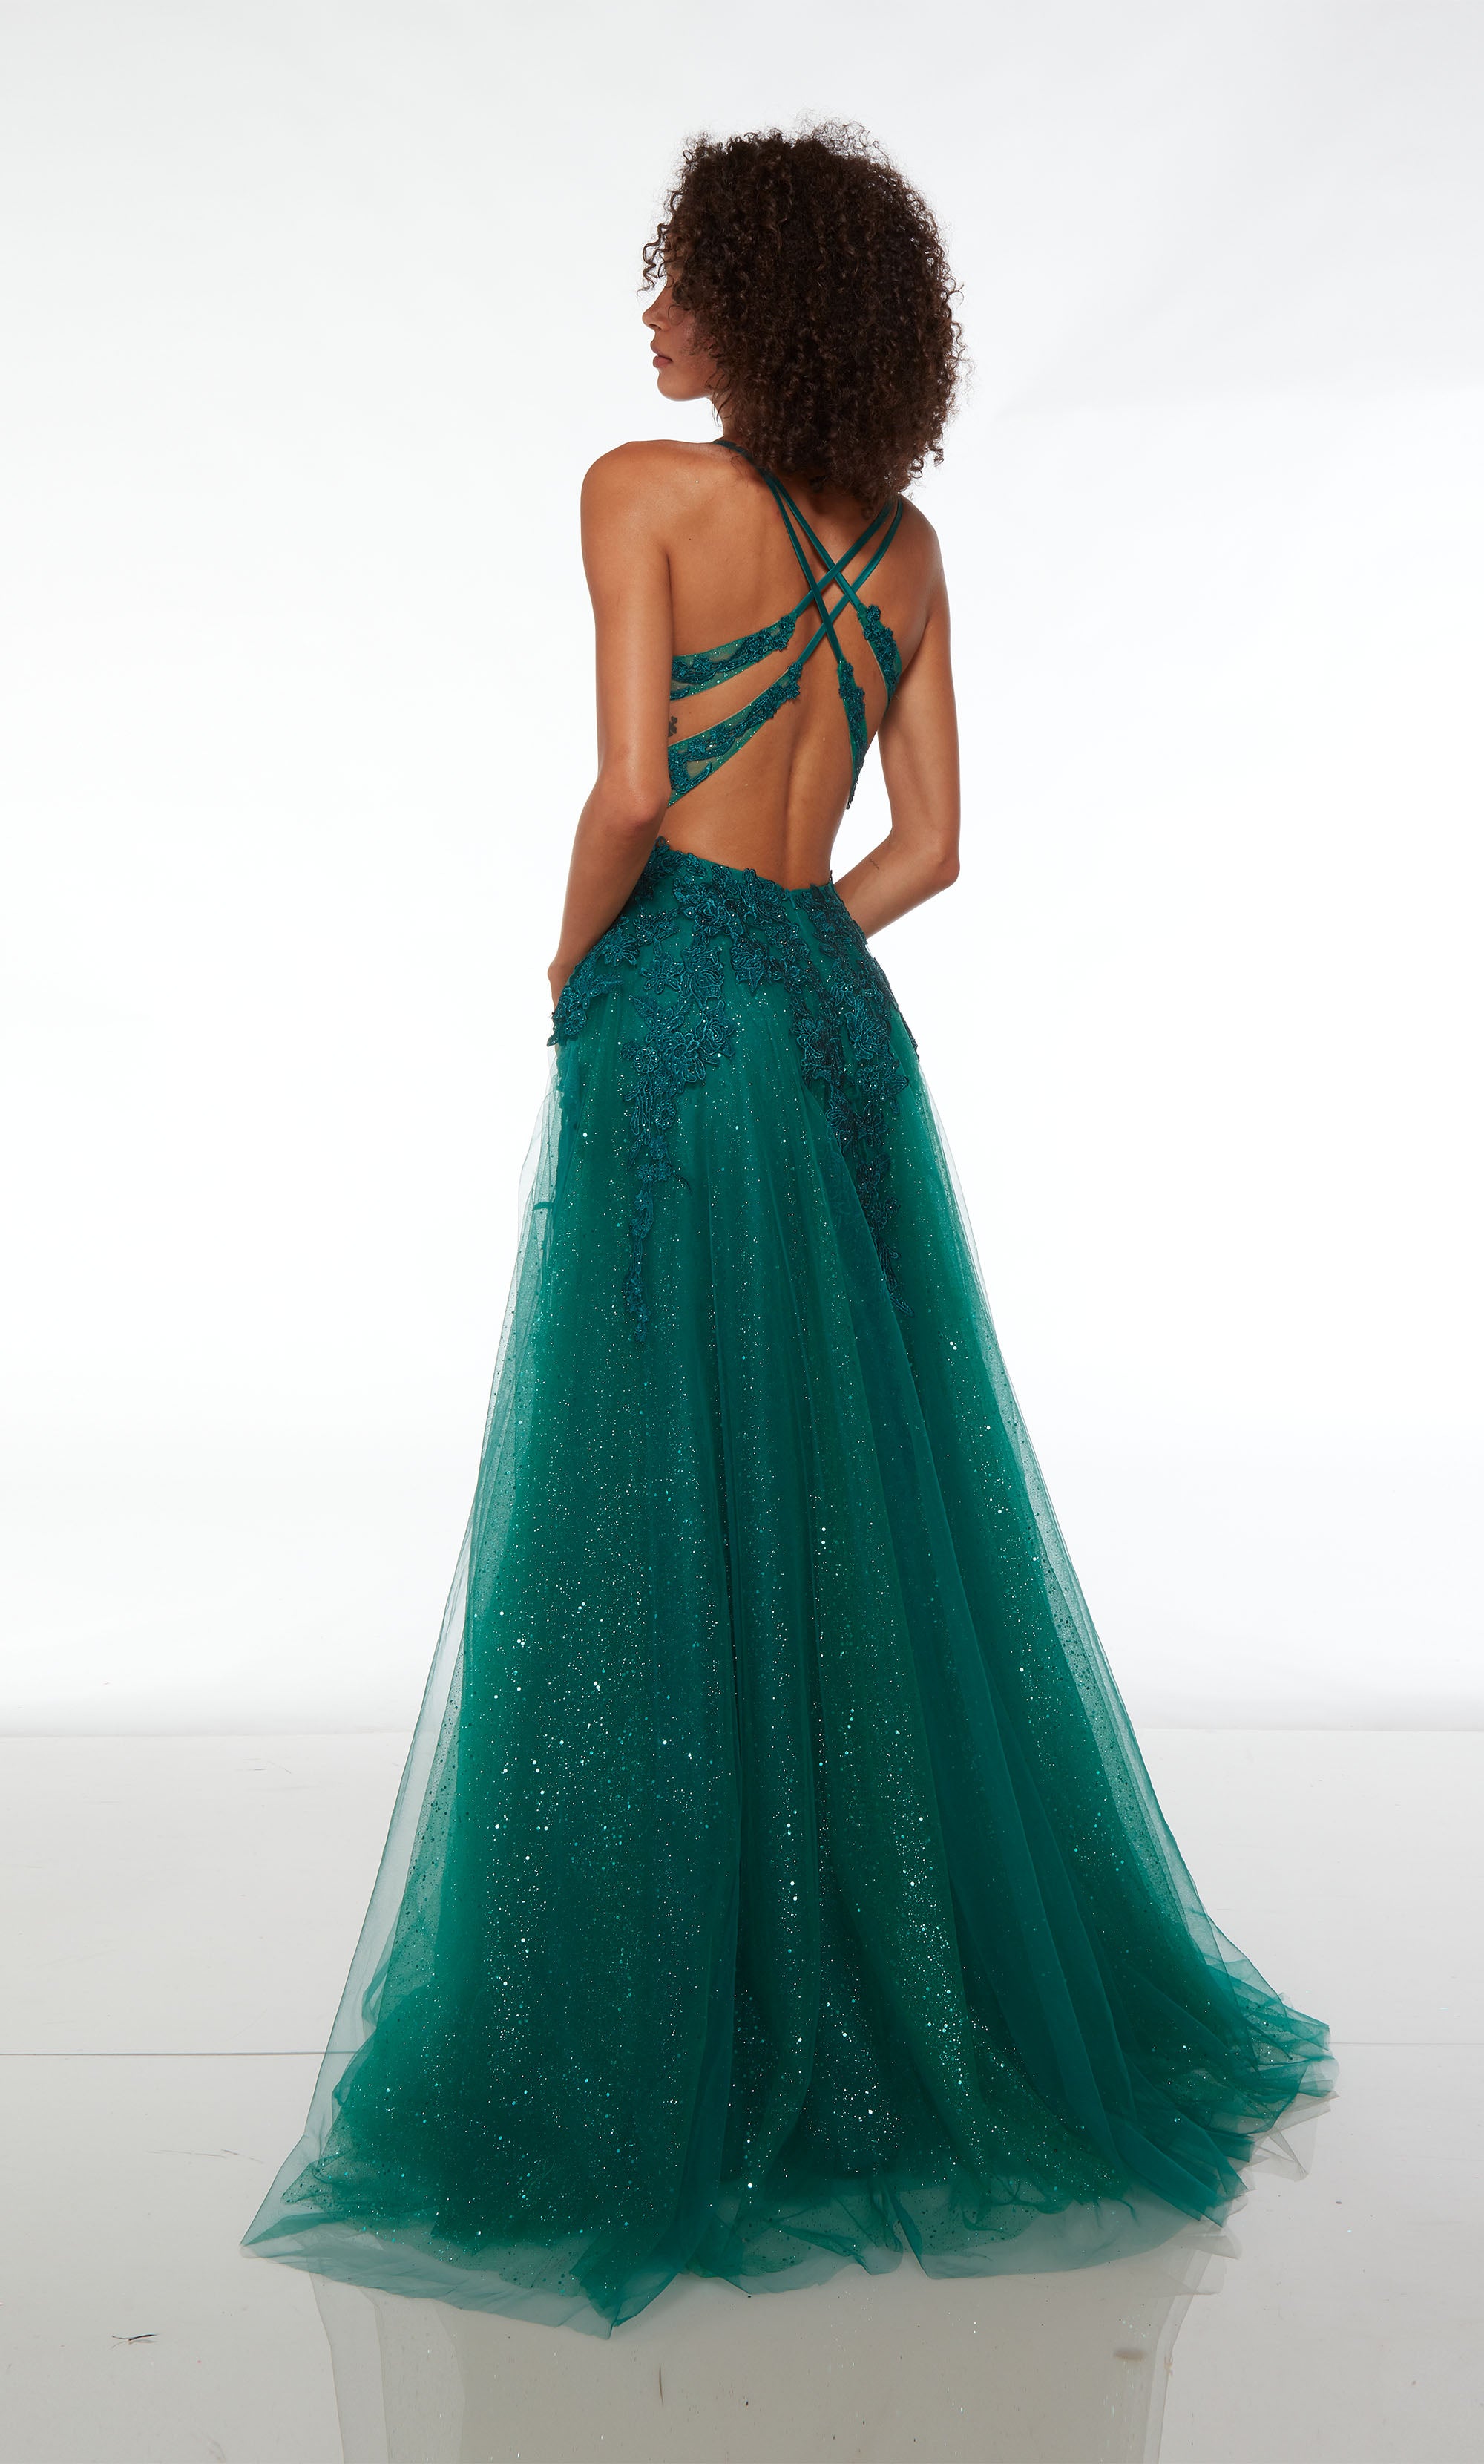 Green prom dress: Plunging corset top, high slit, crisscross strappy back, and train in glitter tulle fabric. Floral lace appliques strategically placed for the perfect touch.